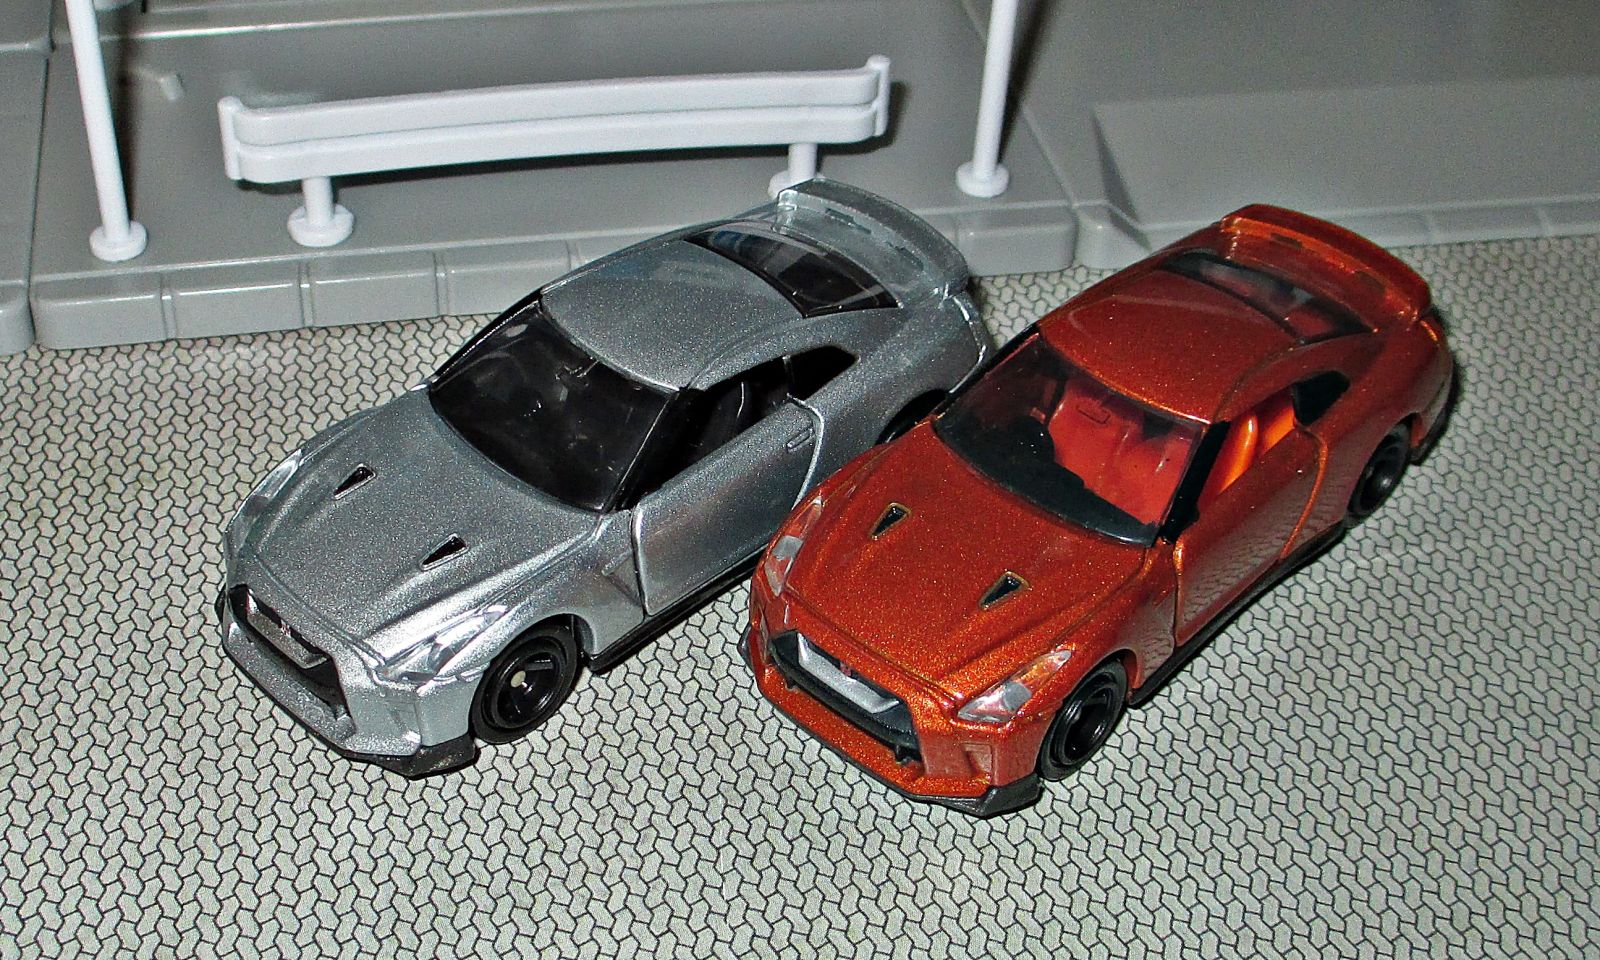 Illustration for article titled Land of the Rising Sun-Day: New Tomica Nissan GT-R Casting